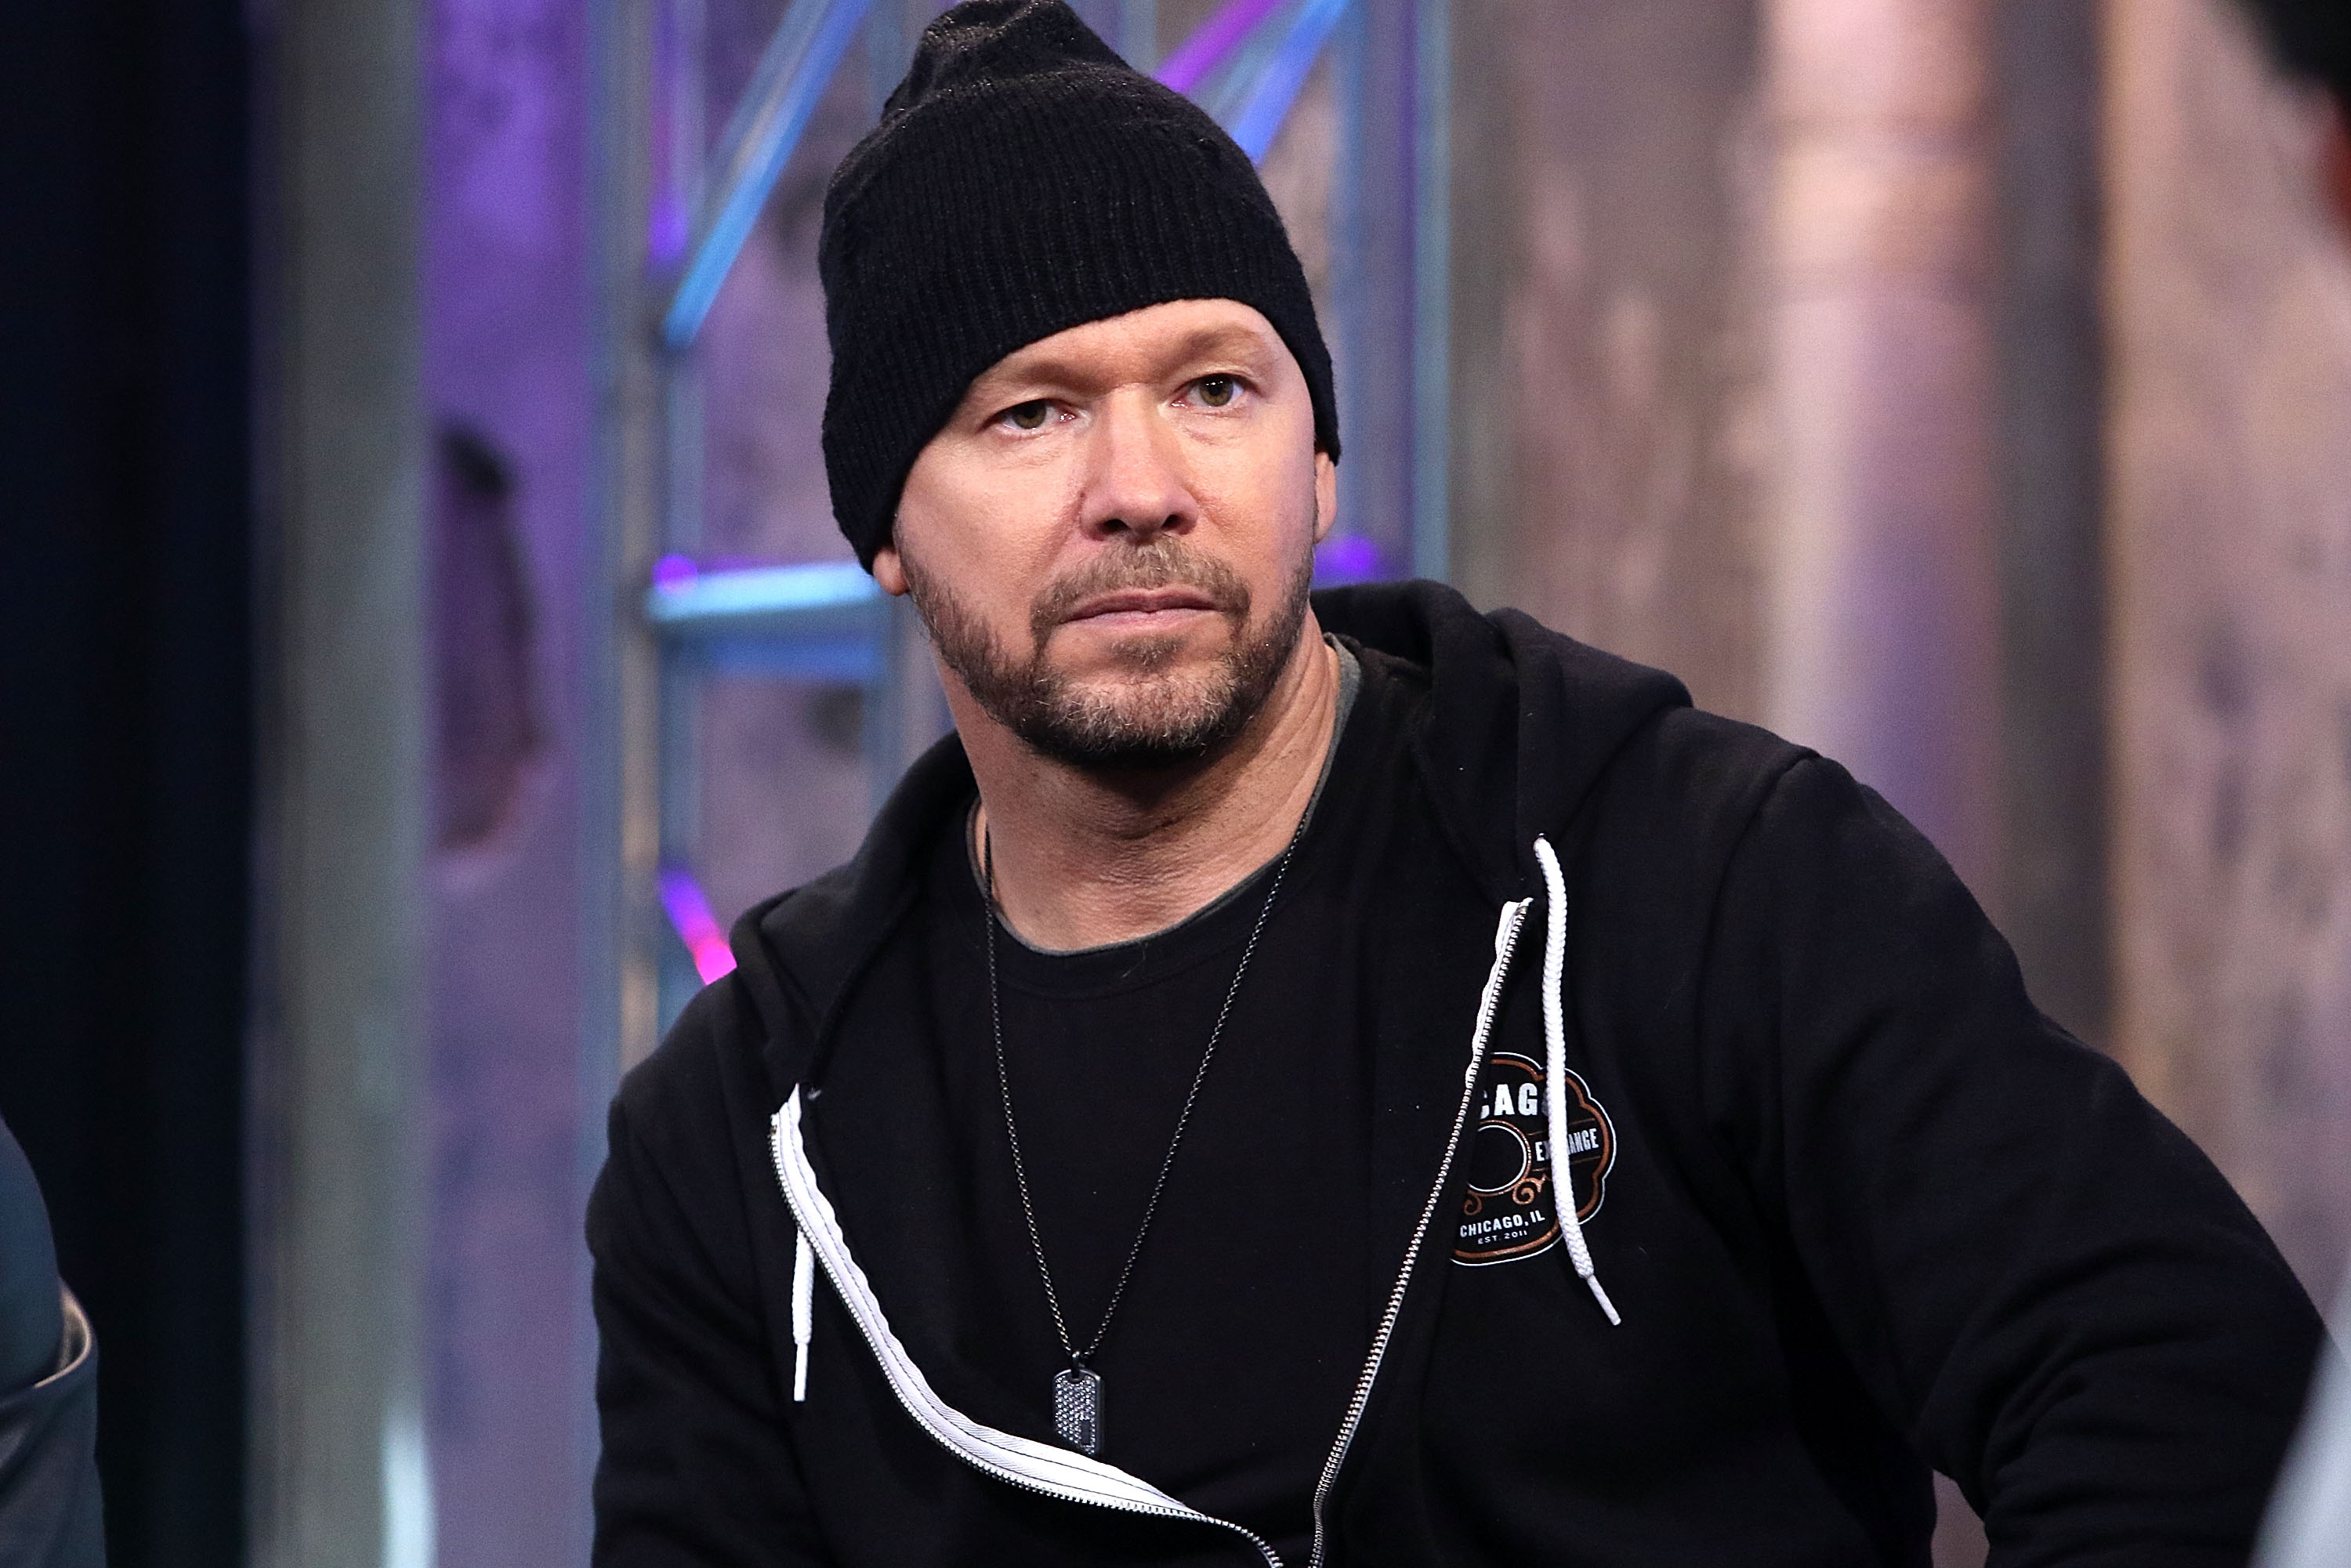 Donnie Wahlberg attends an AOL Build Speaker Series in New York on June 9, 2016 | Photo: Getty Images